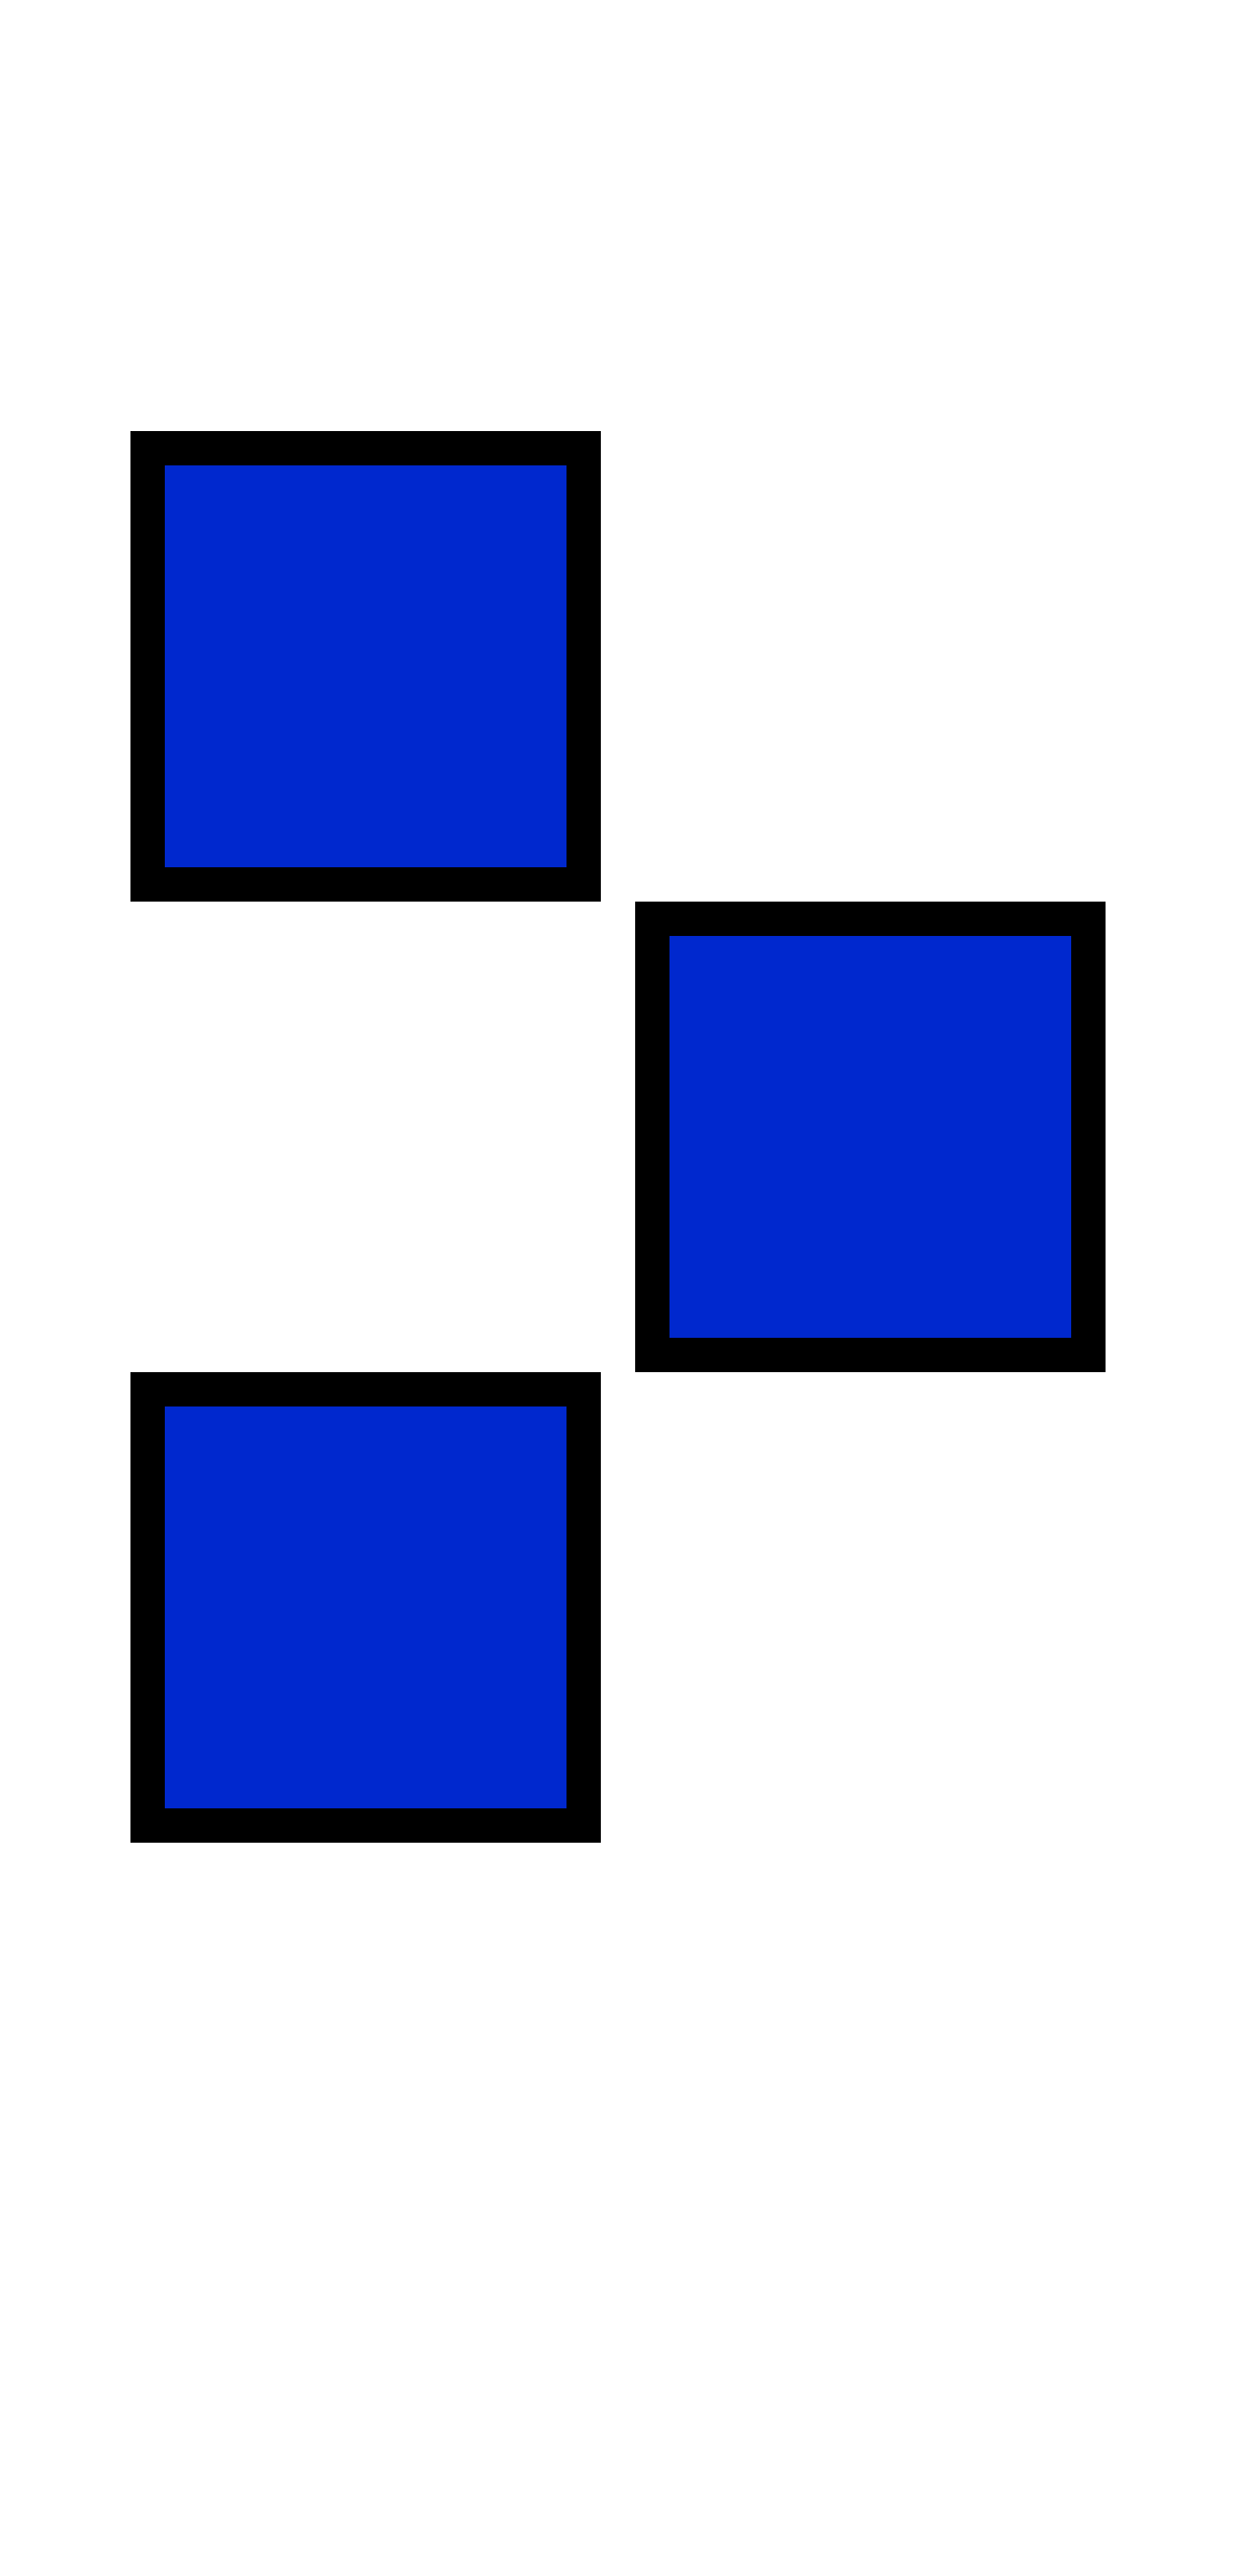 blue squares on a grid